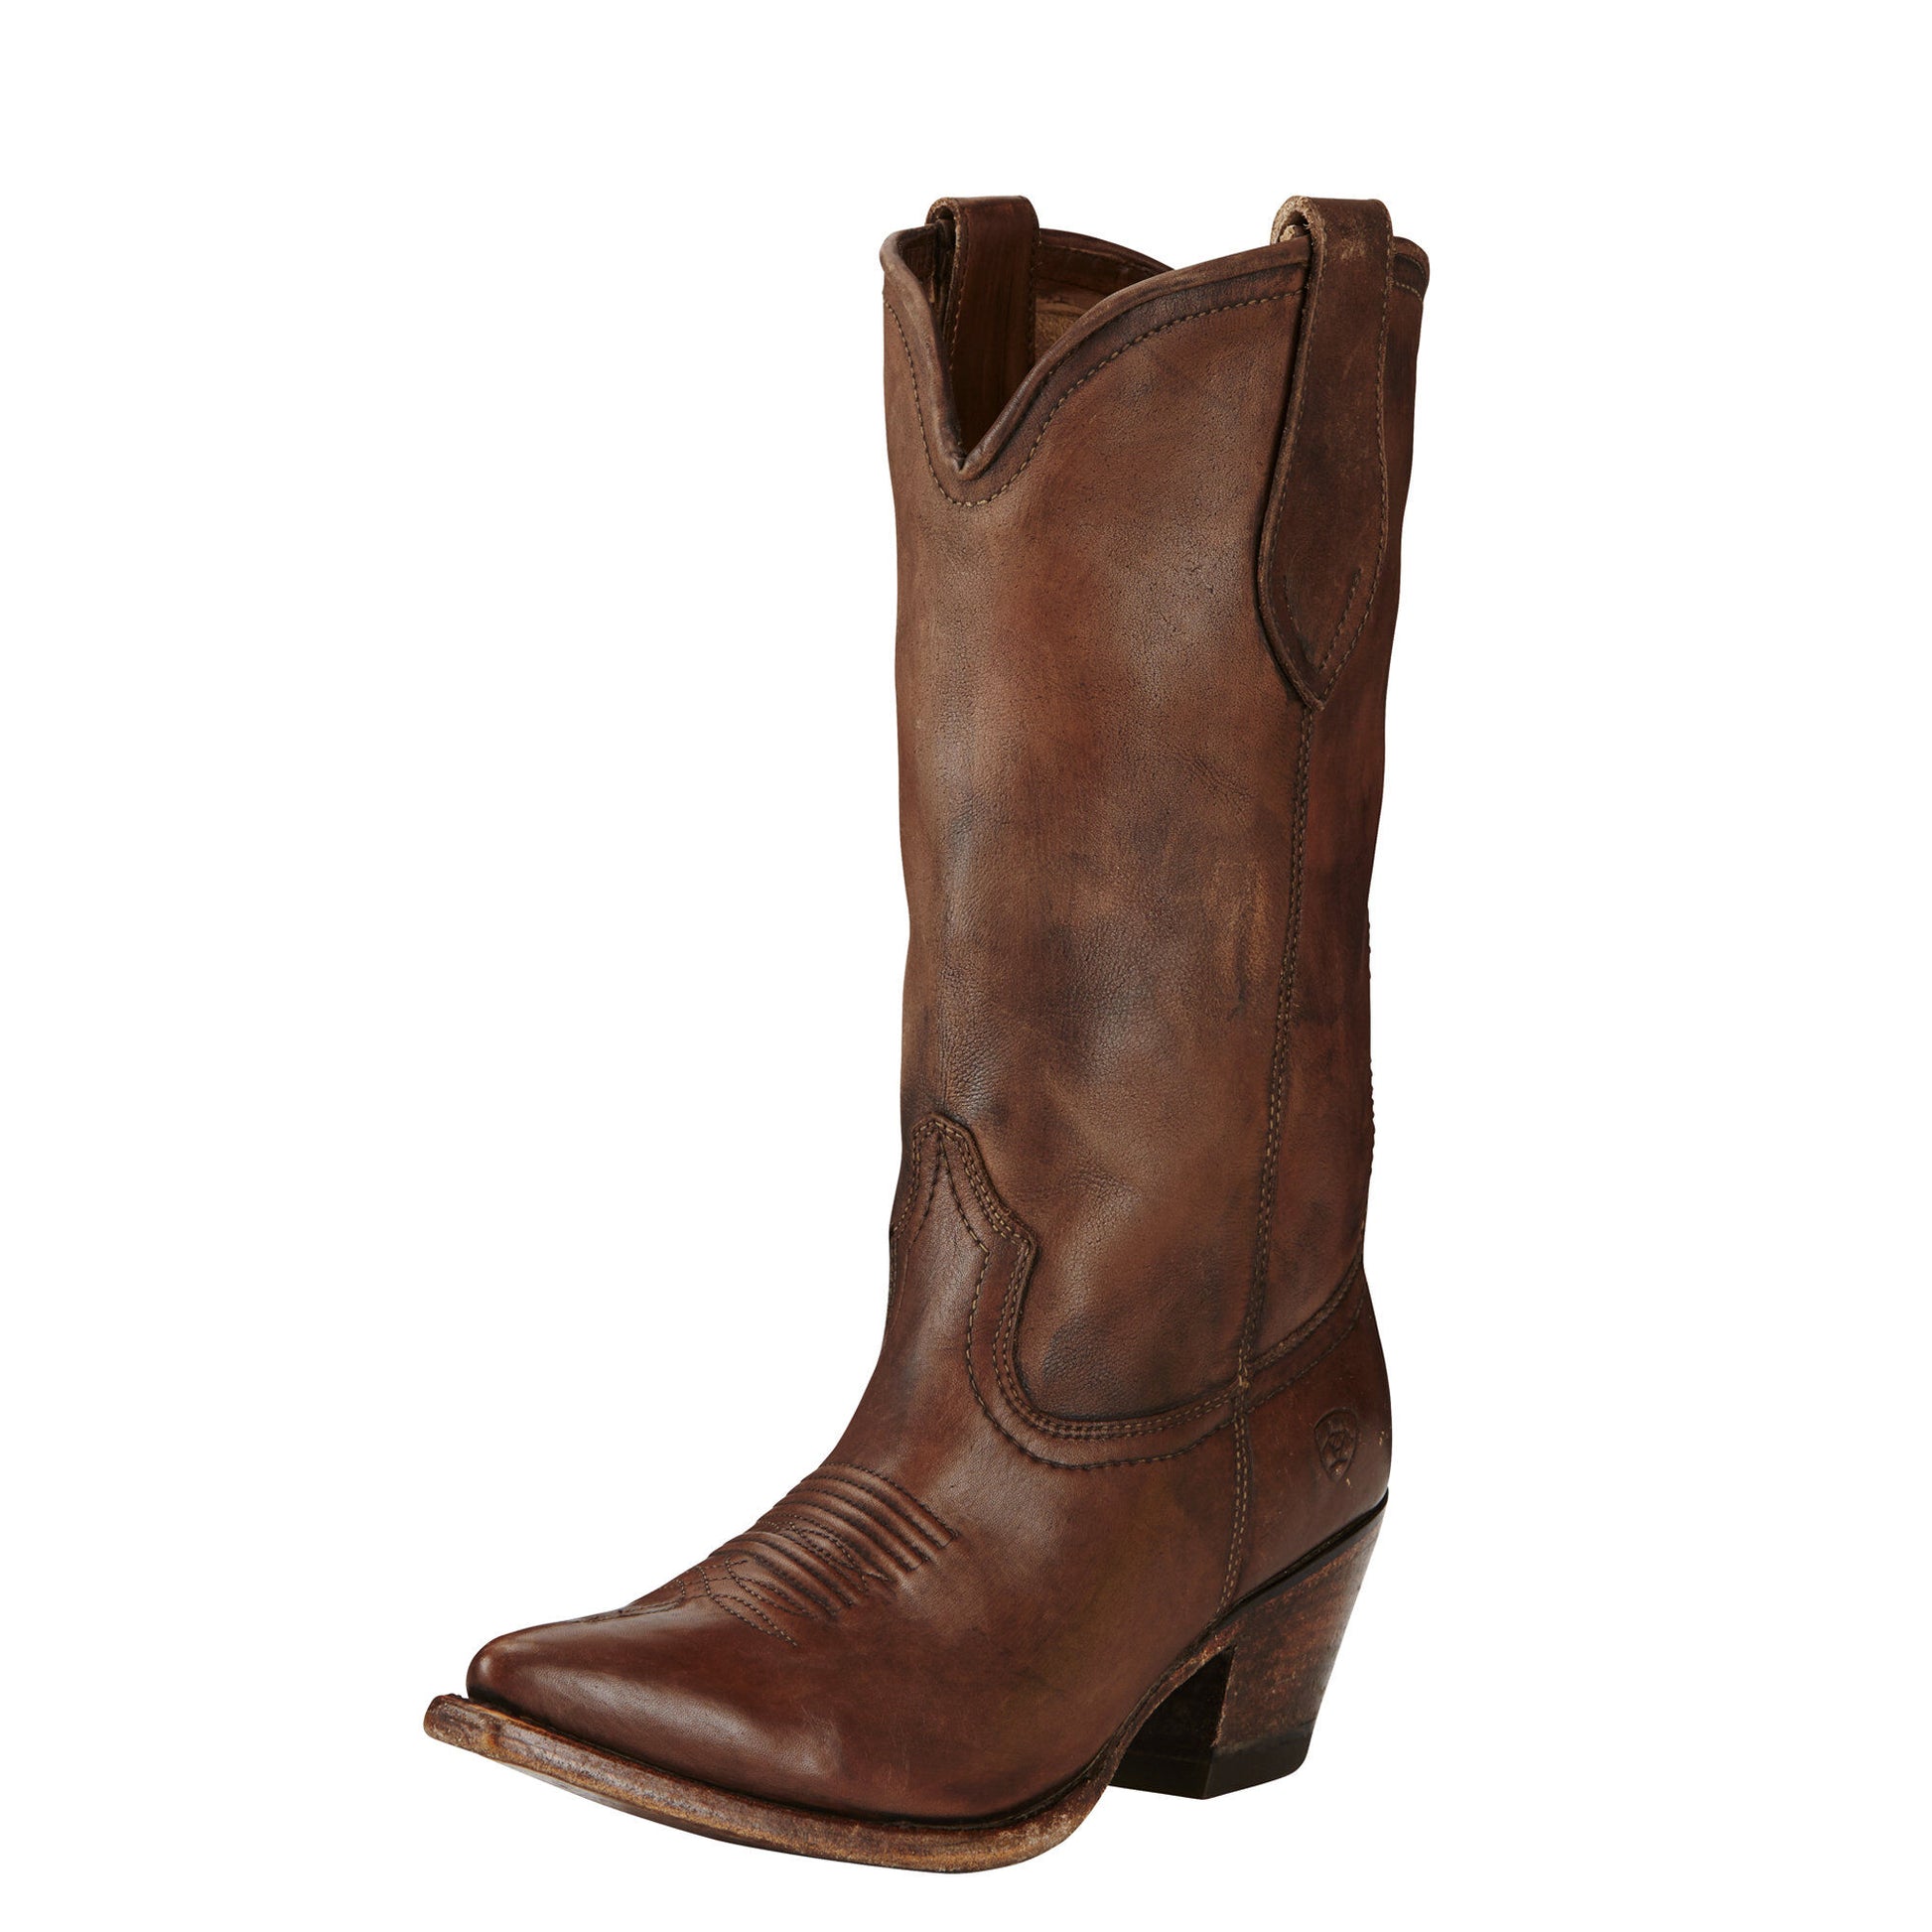 Ariat Women's Josefina Boot - Naturally Distressed Brown - French's Boots